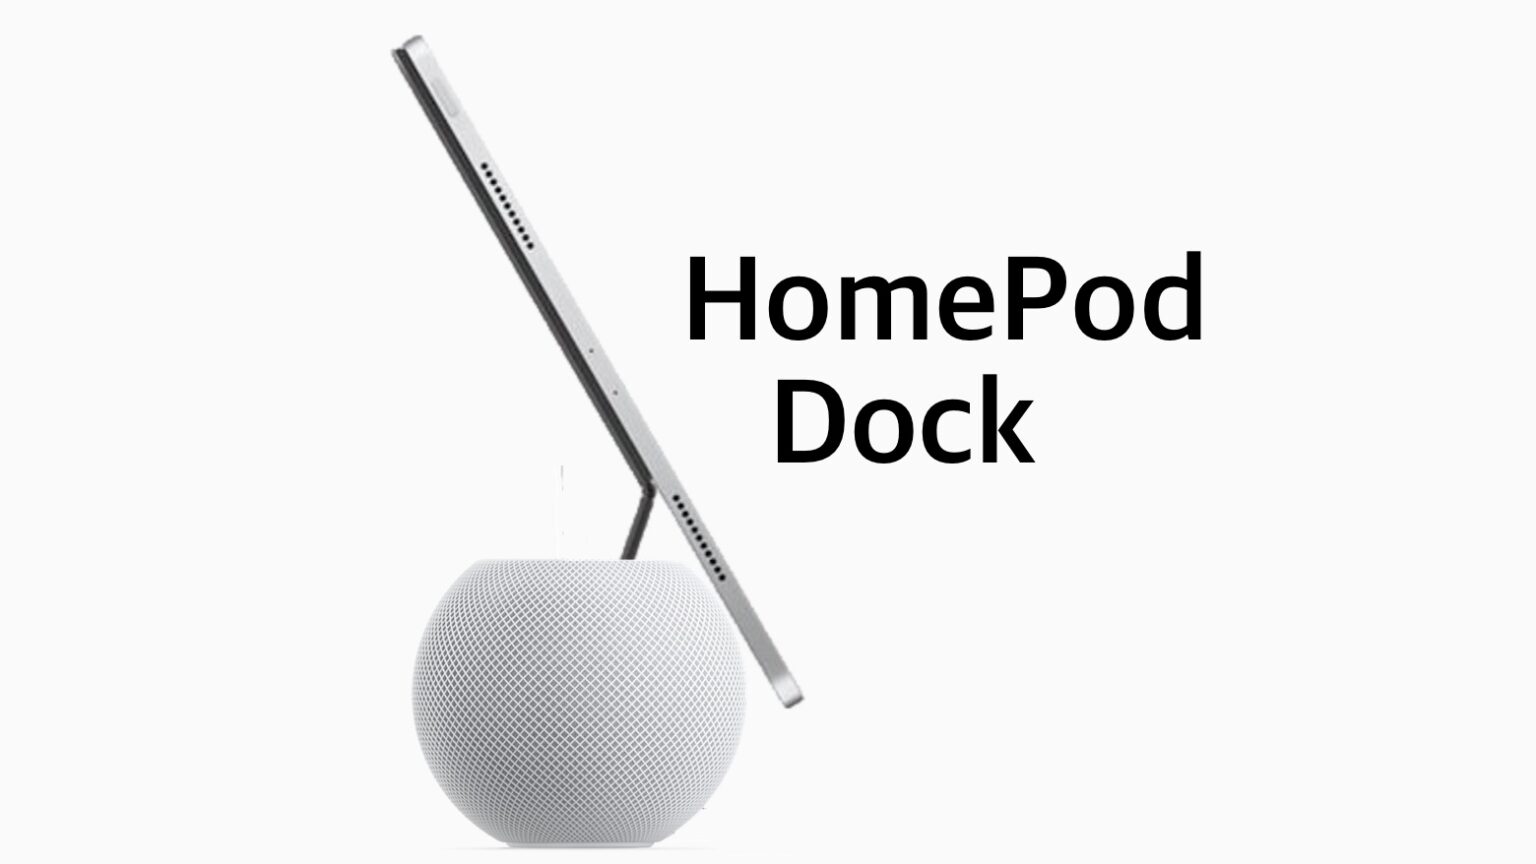 Apple prepping iPad cradle that's also a HomePod